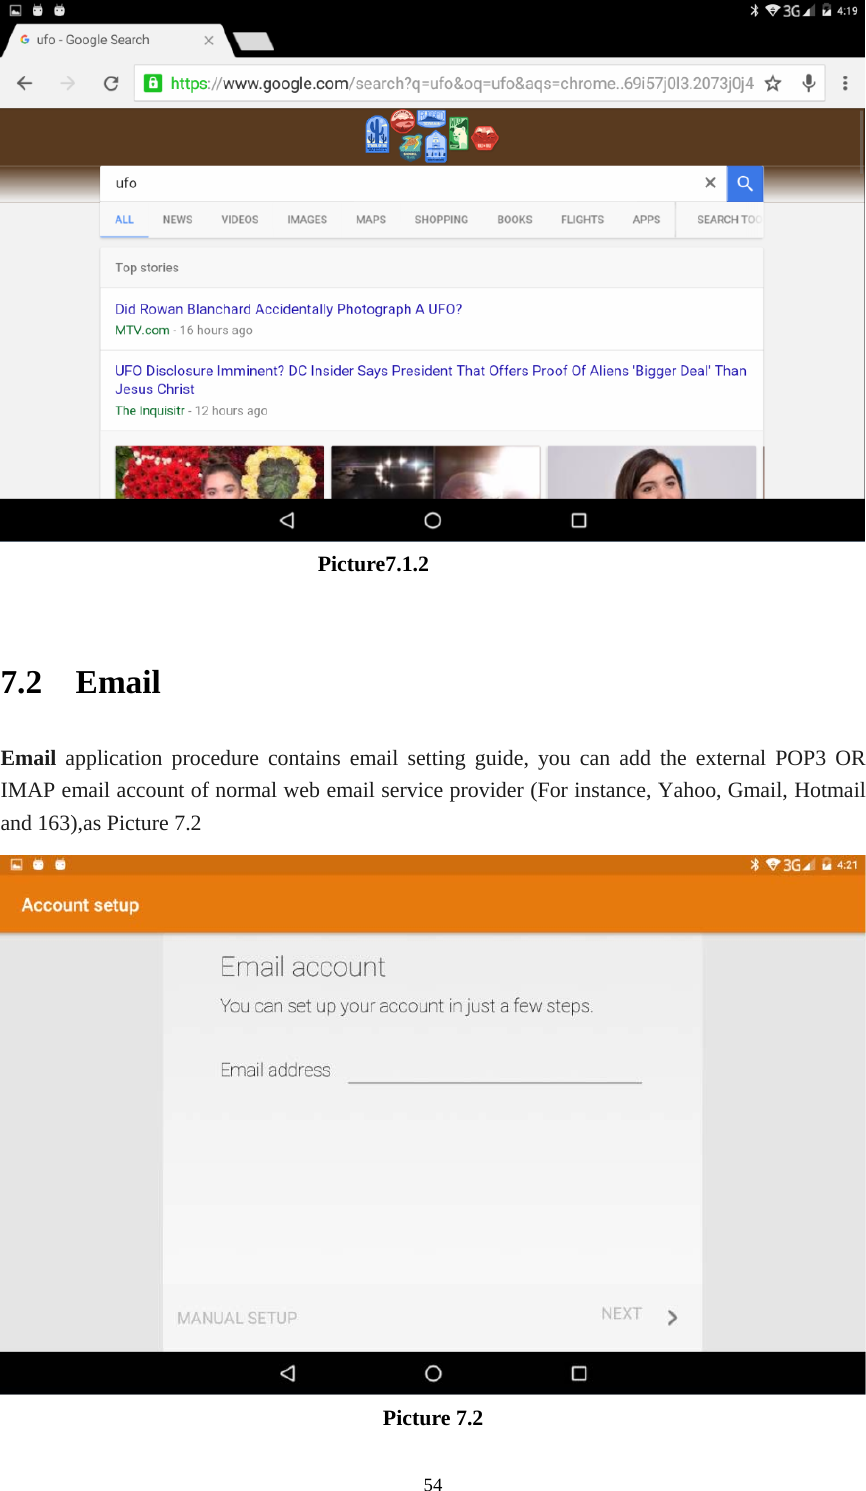     54                              Picture7.1.2  7.2  Email Email application procedure contains email setting guide, you can add the external POP3 OR IMAP email account of normal web email service provider (For instance, Yahoo, Gmail, Hotmail and 163),as Picture 7.2  Picture 7.2 